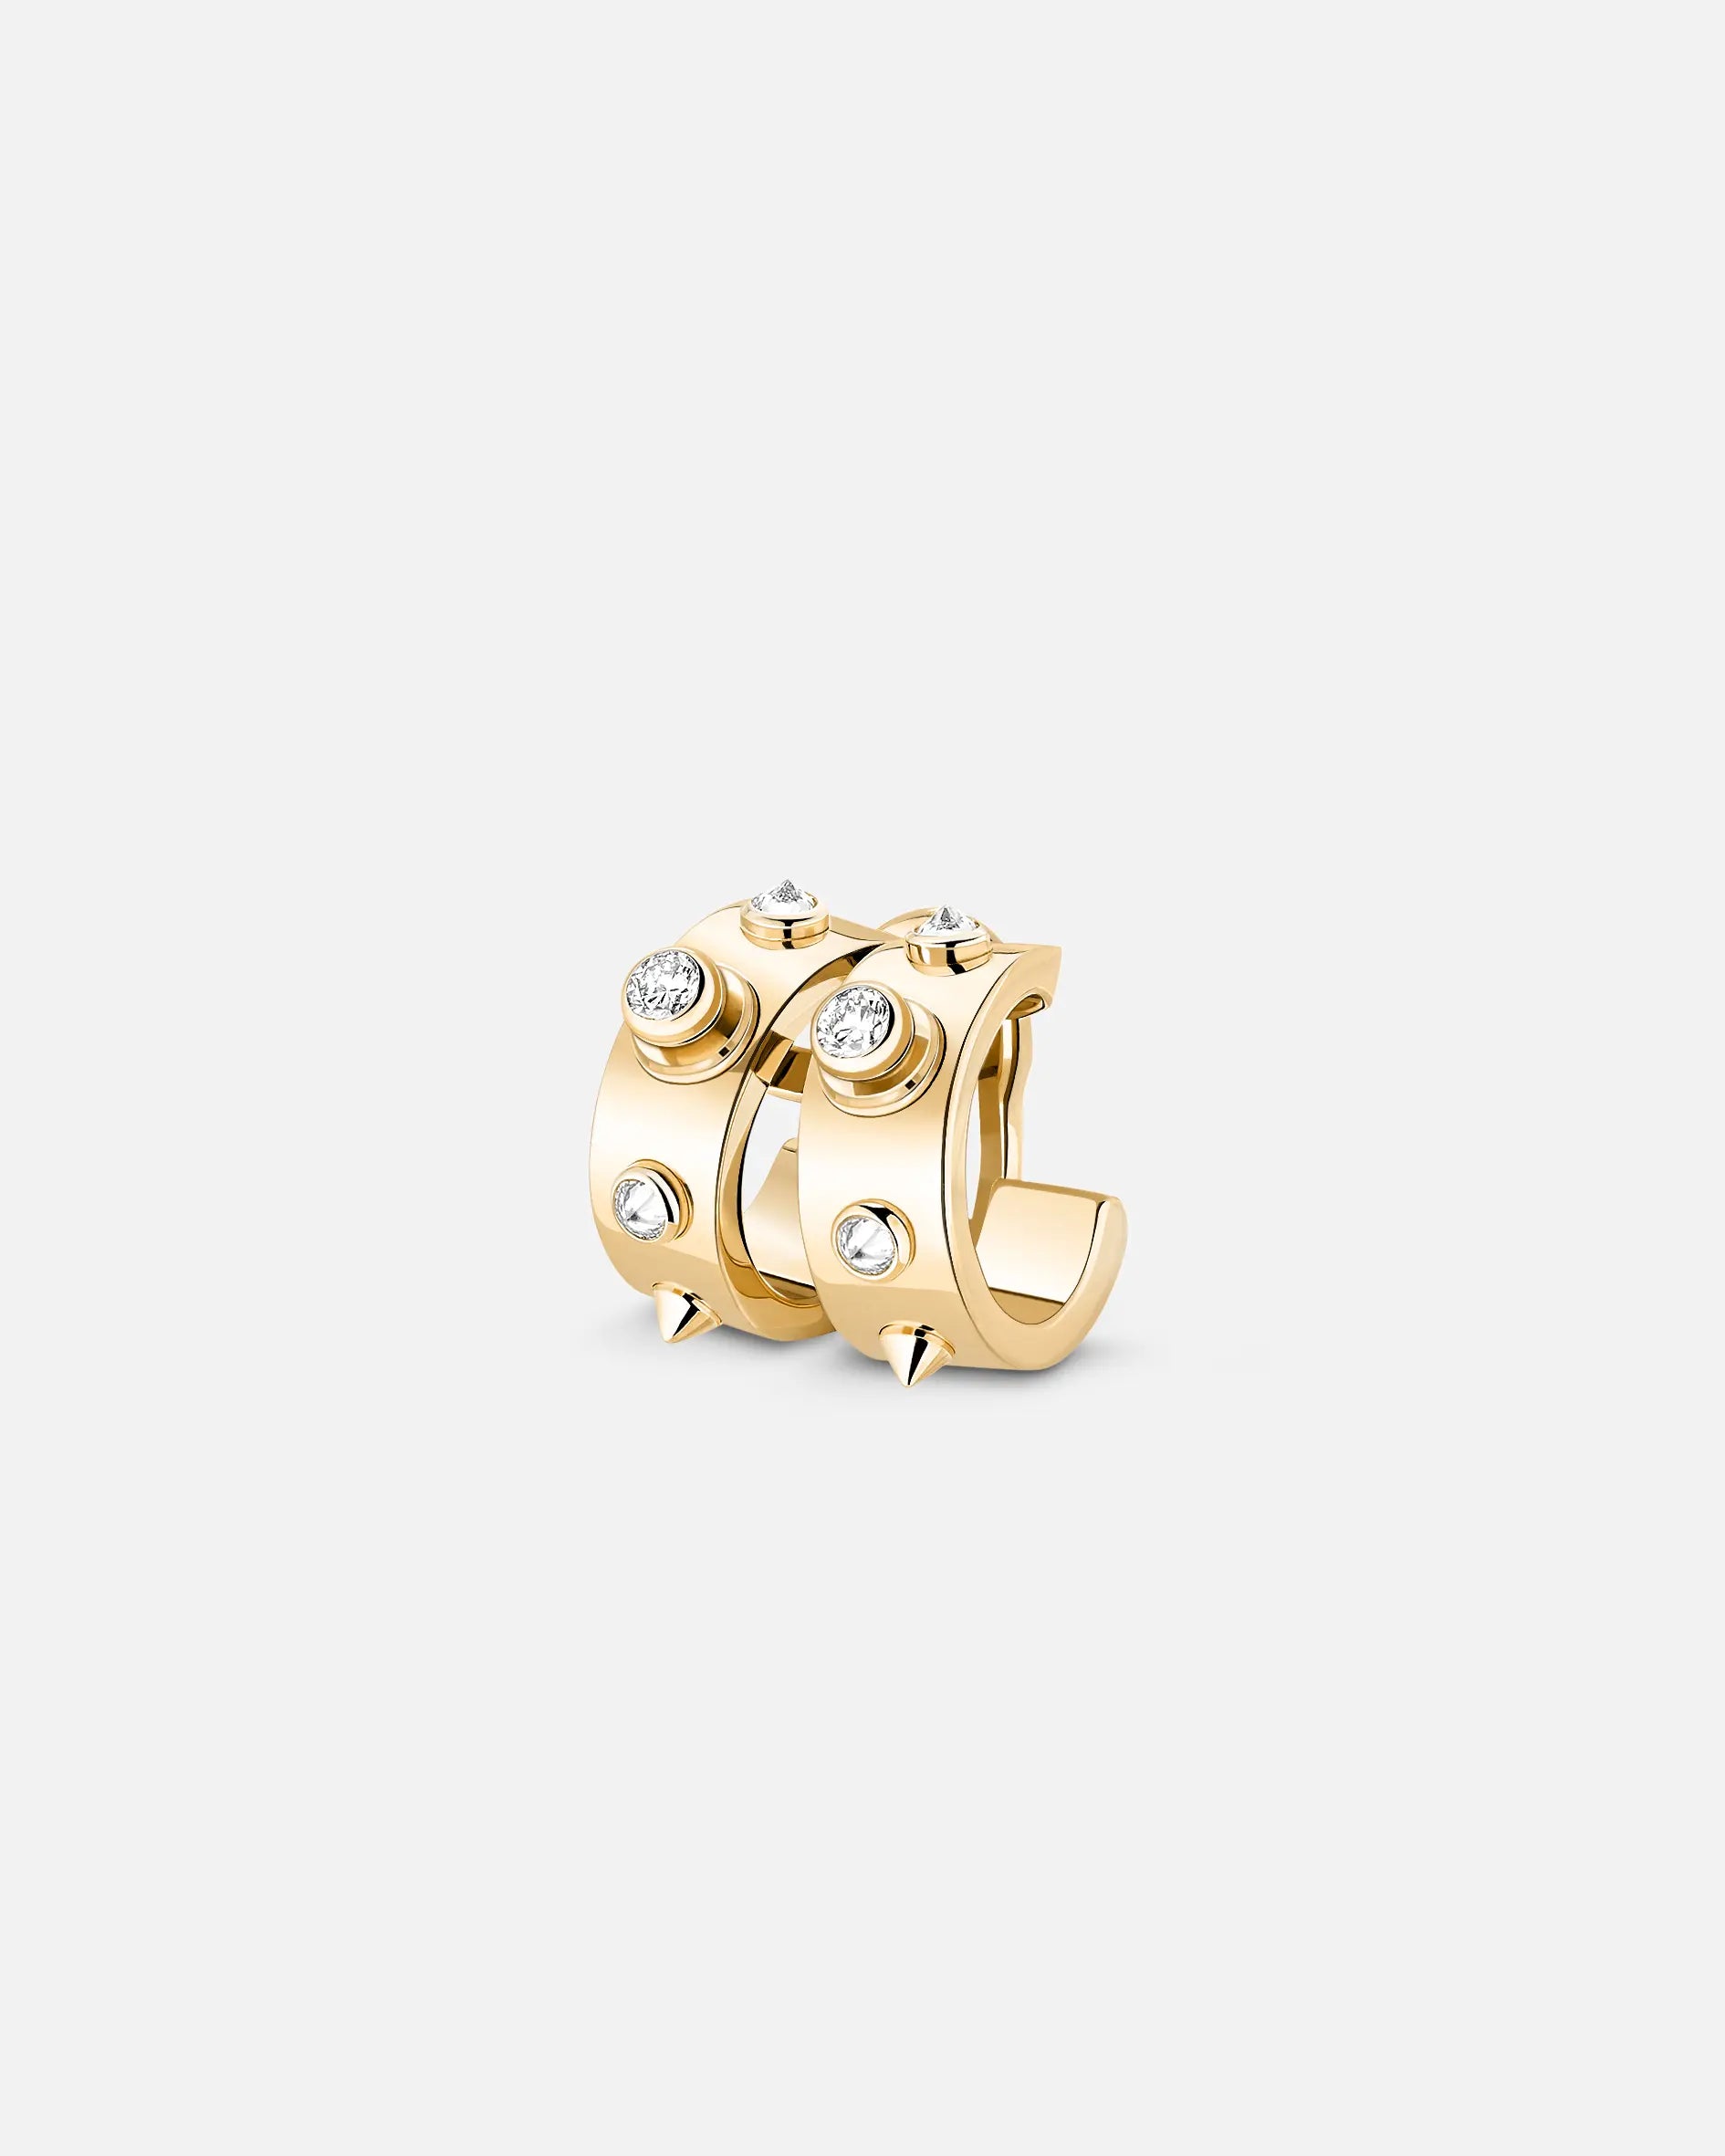 Brunch in NY Ear Clip in Yellow Gold - 1 - Nouvel Heritage